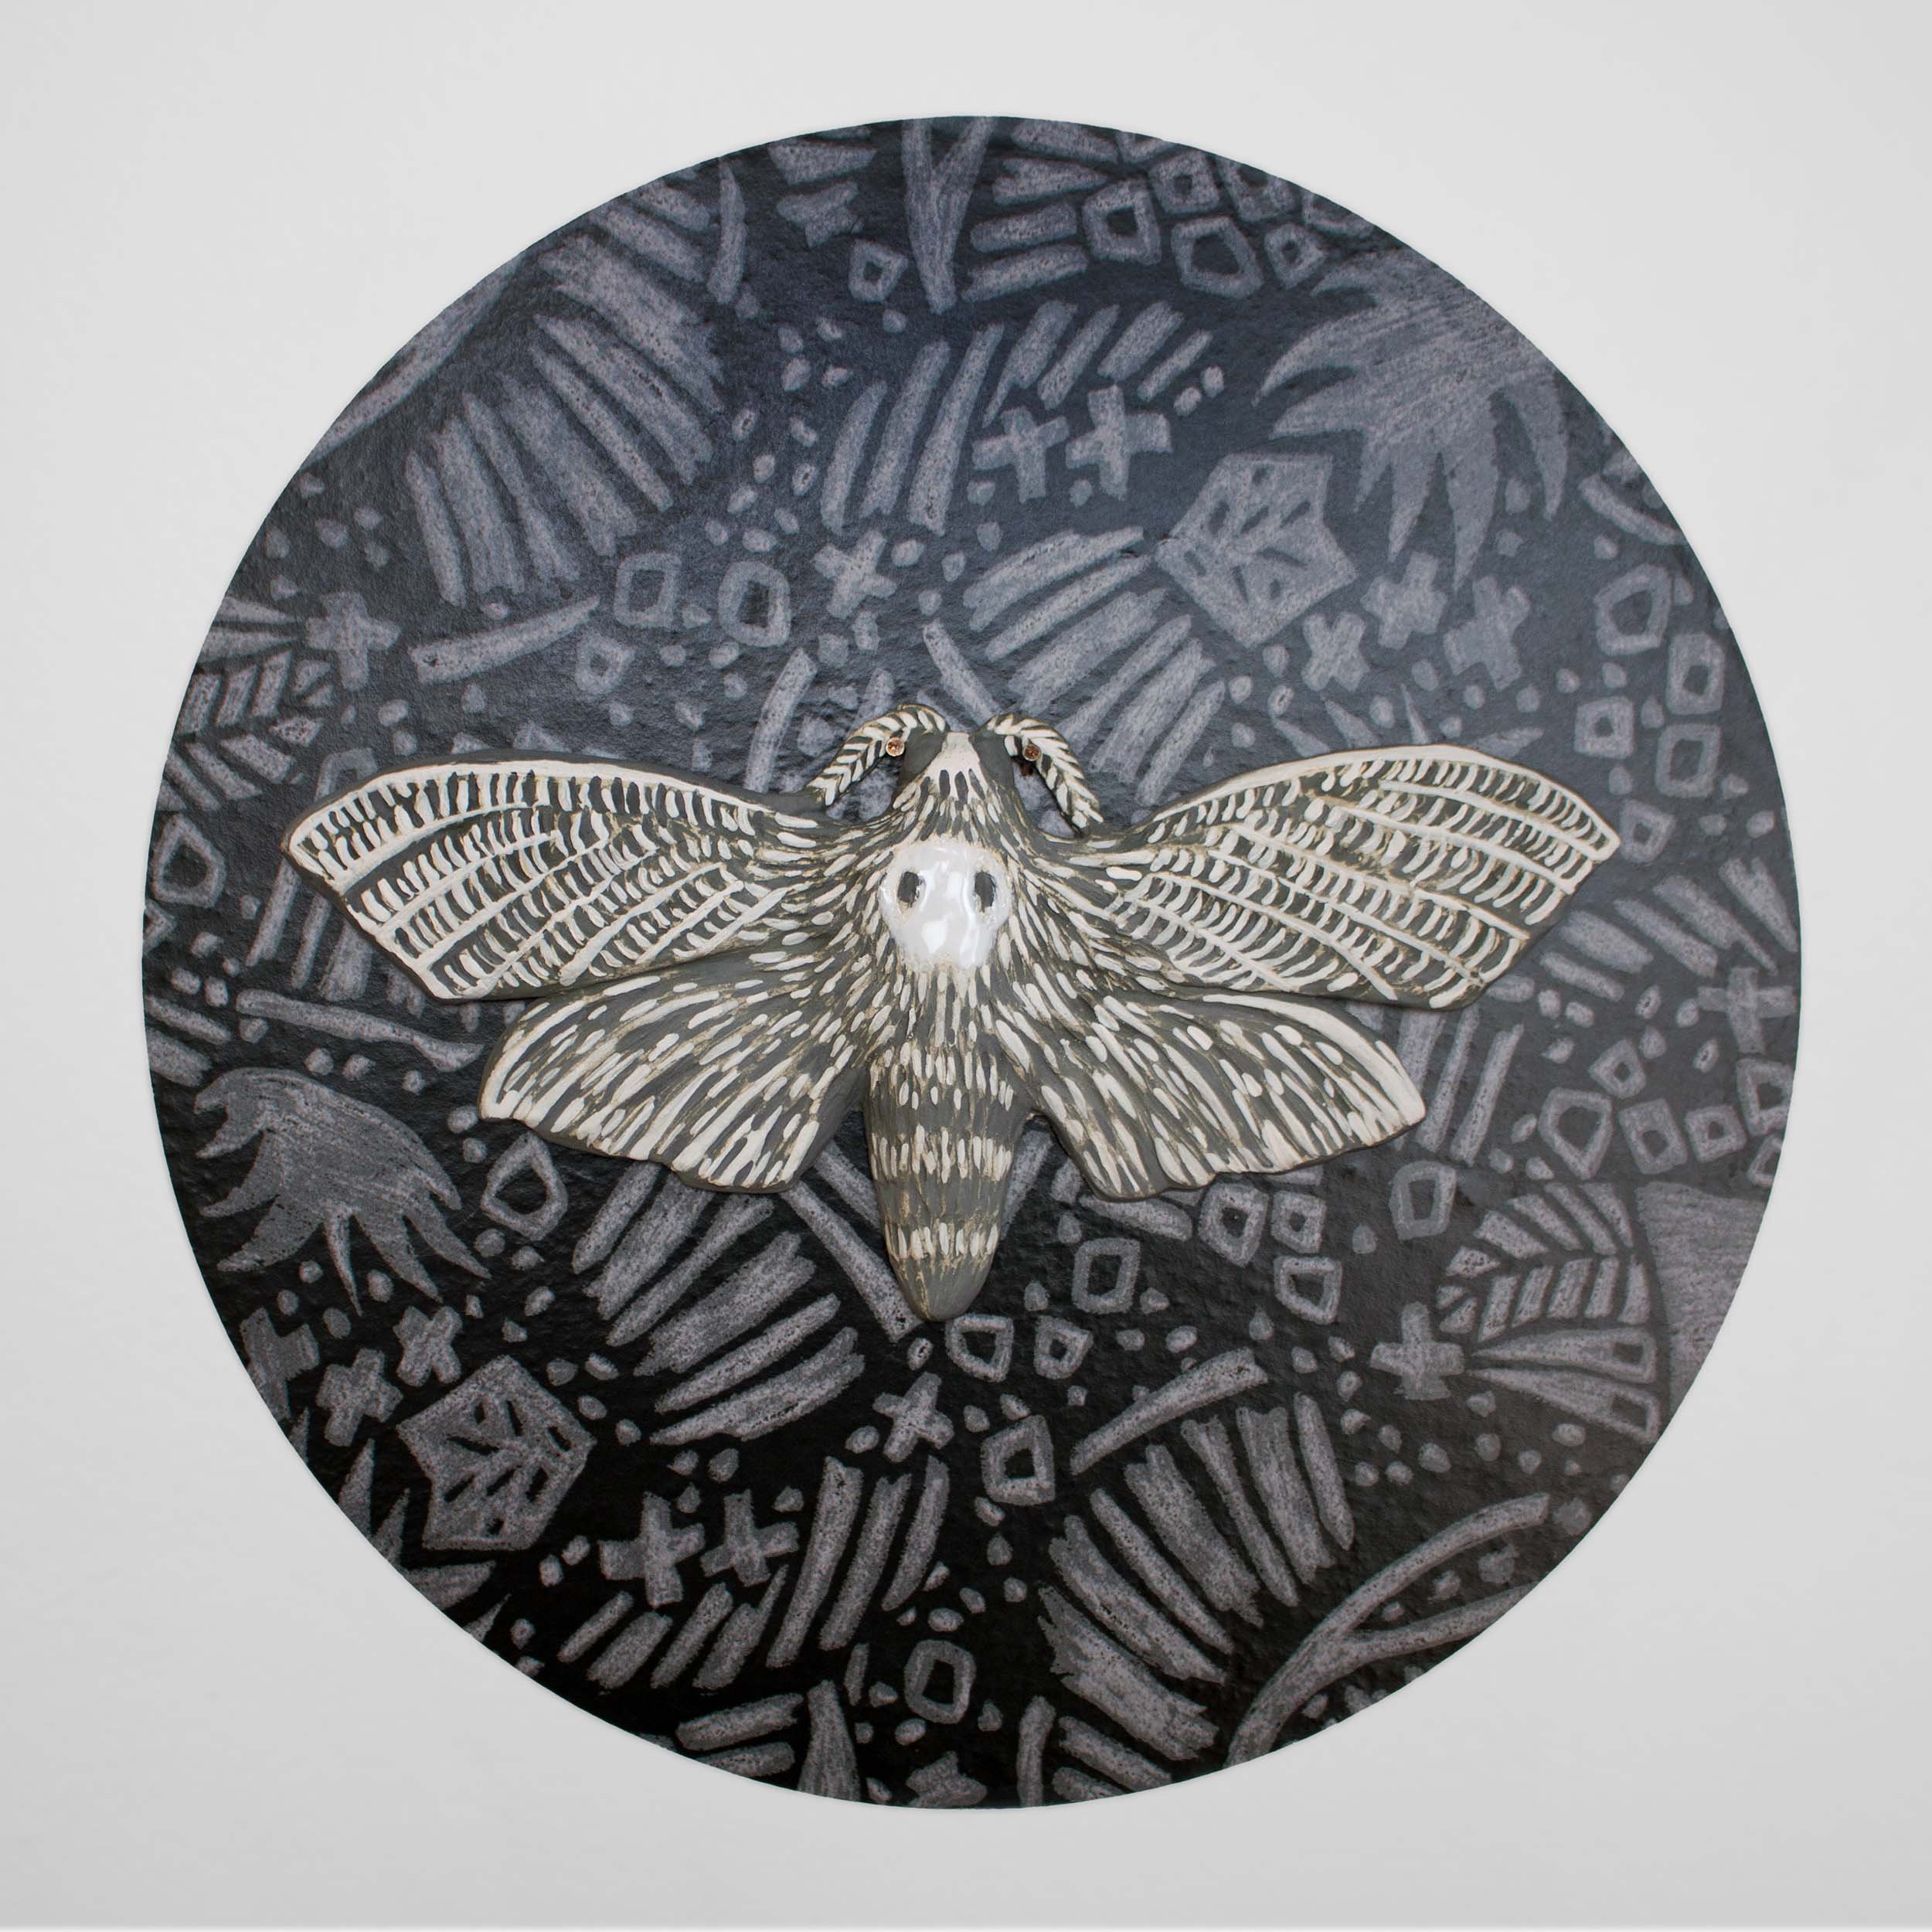   Moth 01,  ceramic moth mounted on wallpaper backdrop, 11.5”x11.5”x.5”, available 